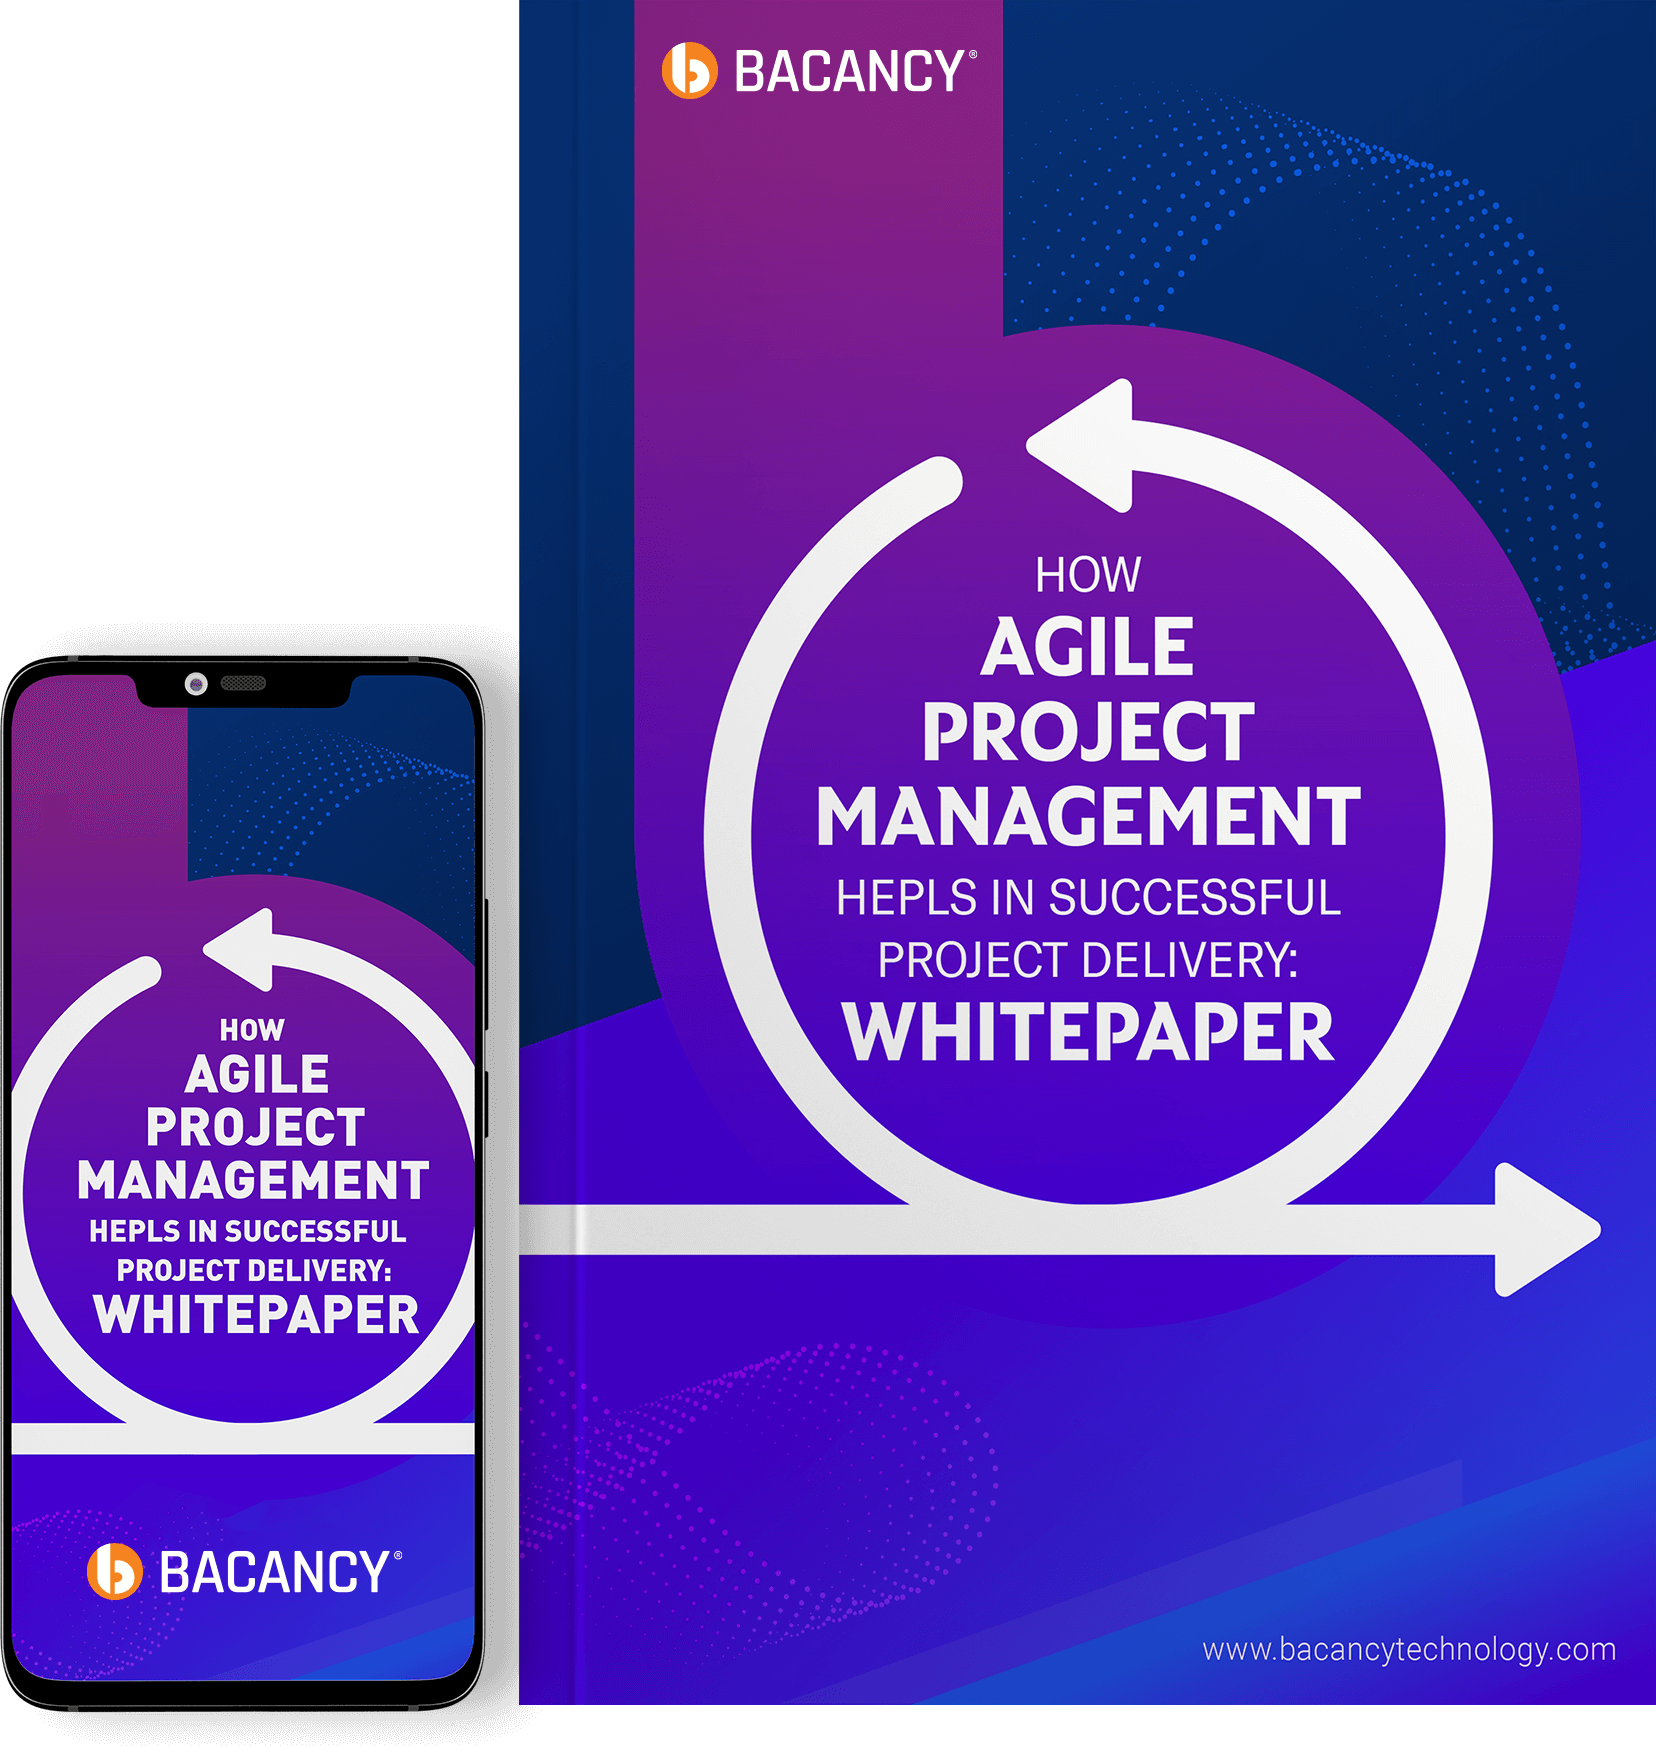 Agile Project Management - Whitepaper 